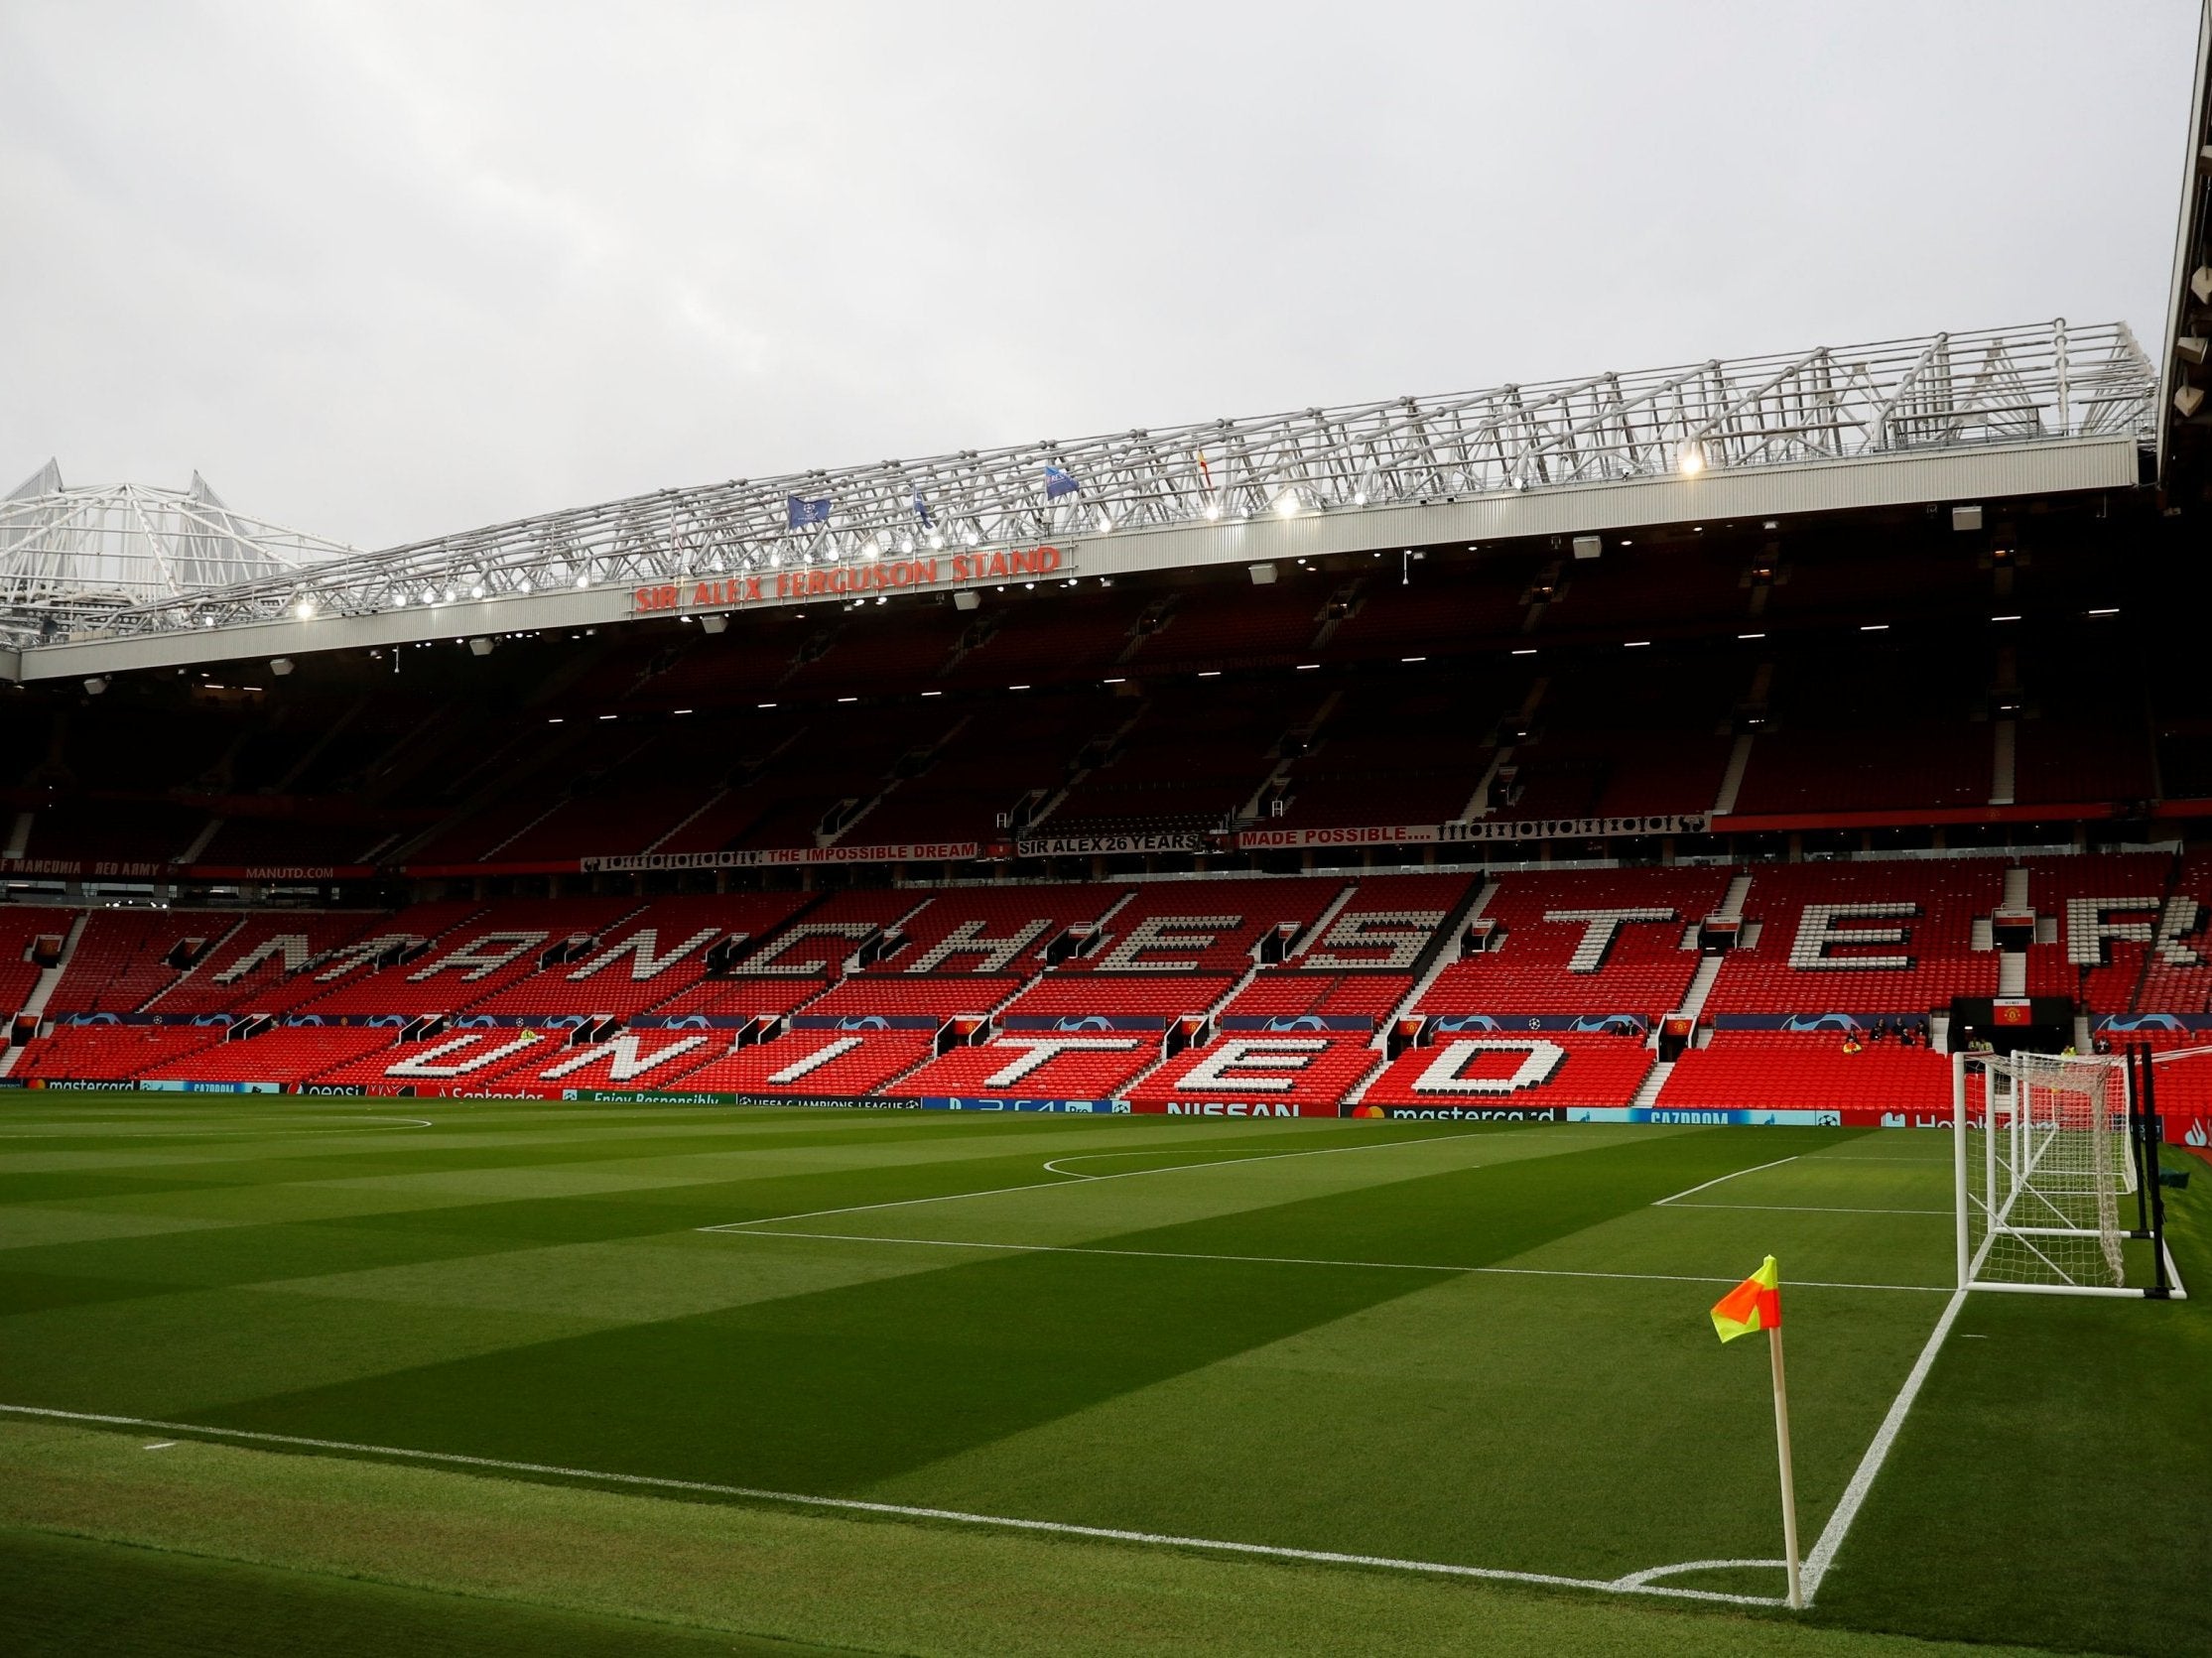 Old Trafford could become the first Premier League side with gender-neutral toilets